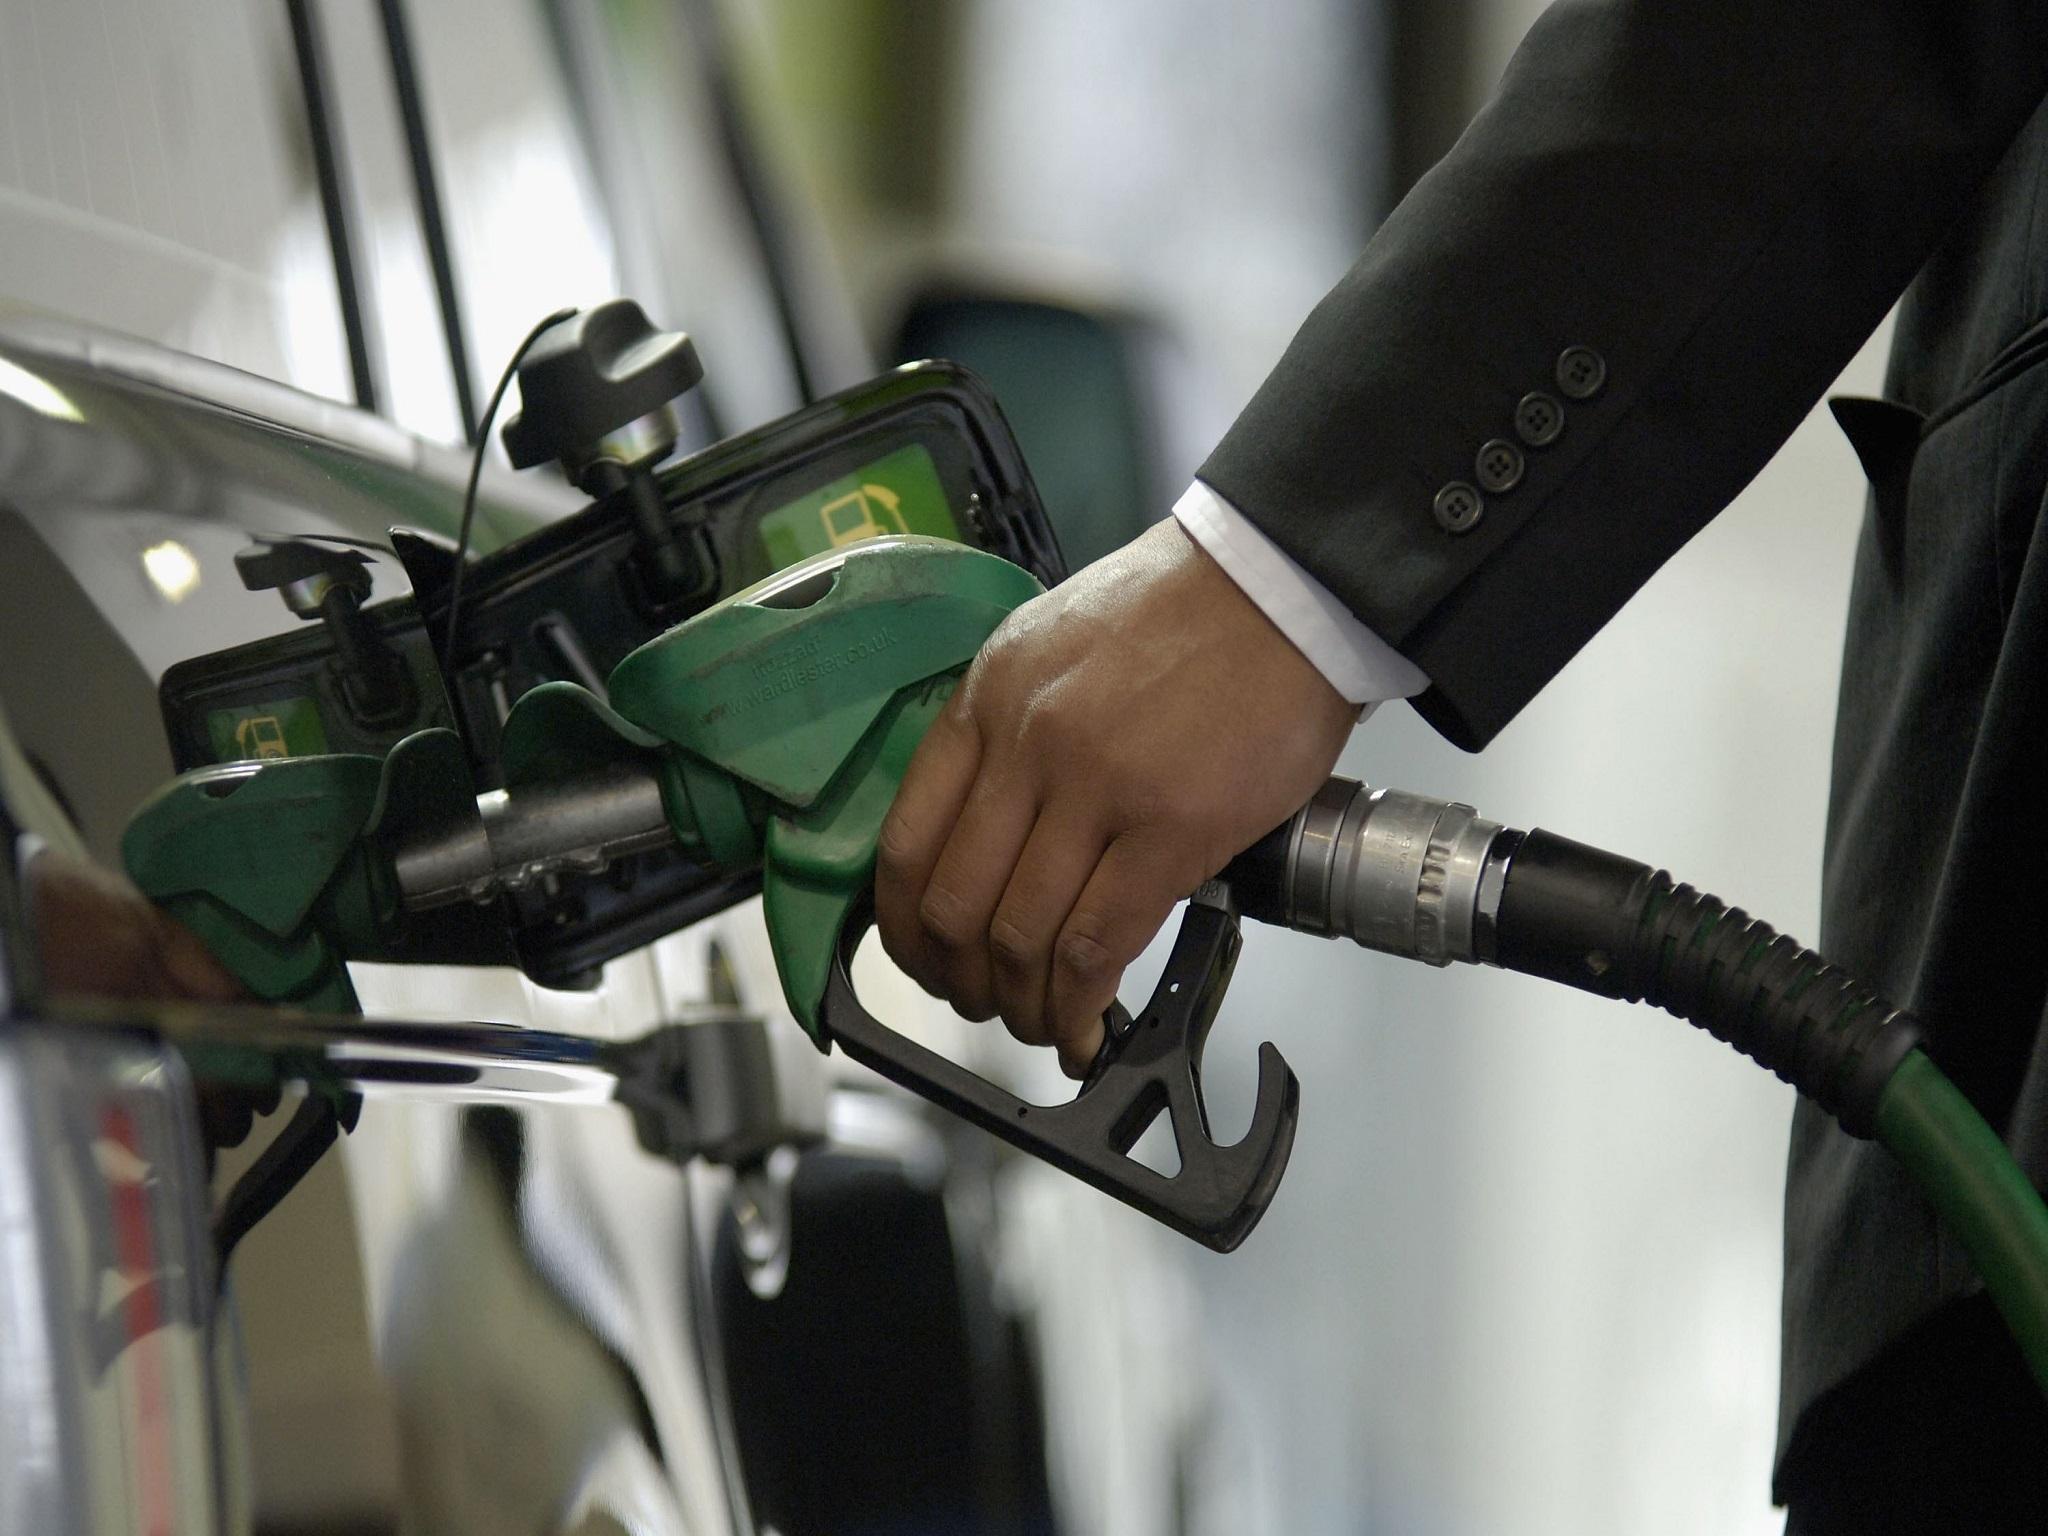 Petrol prices are expected to rise by 8p a litre in December